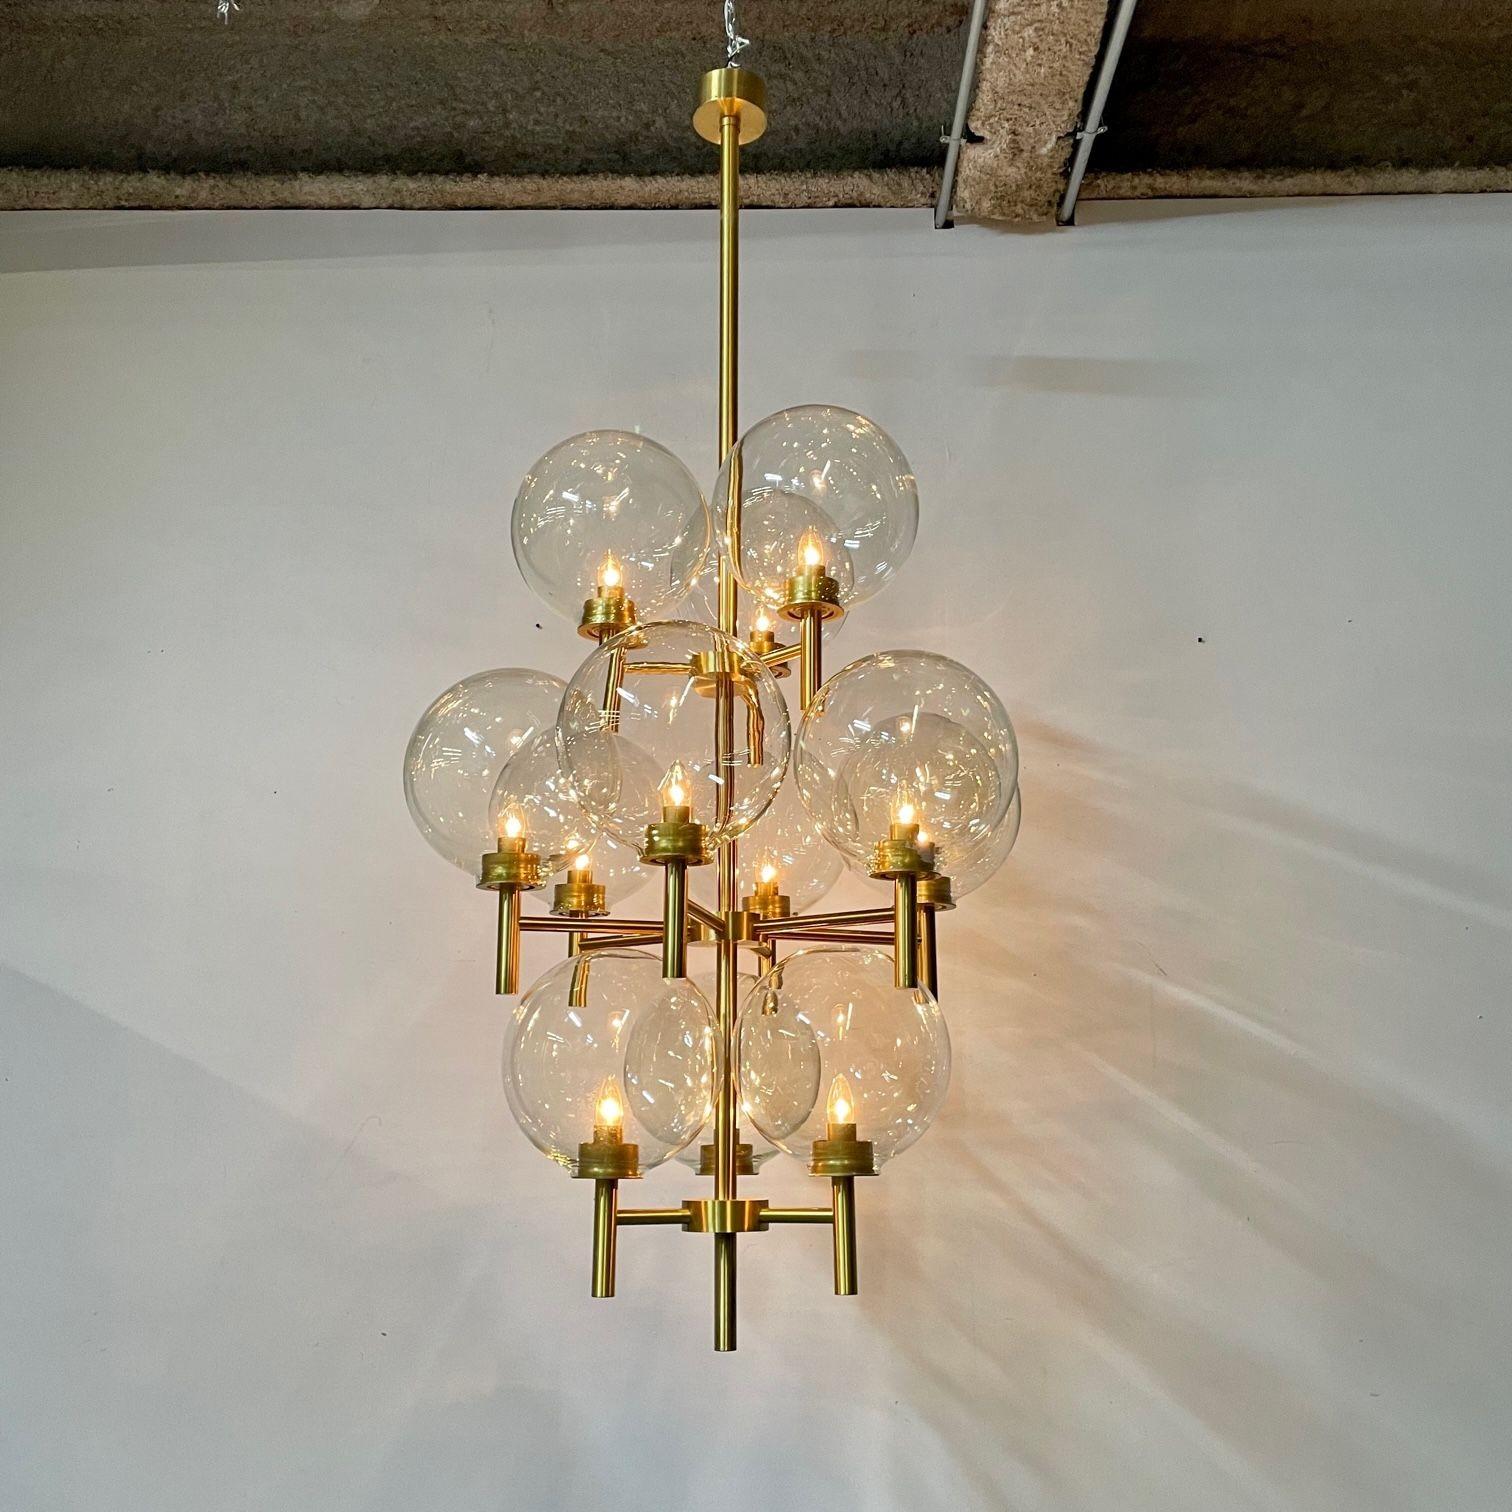 Pair of Monumental Mid-Century Modern Style Chandeliers in Amber Glass and Brass
 
Brass chandeliers with multiple amber globes in the style of Uno & Osten Kristiansson, Sweden, c. 1970s
 
Brass, Amber Glass
2000s